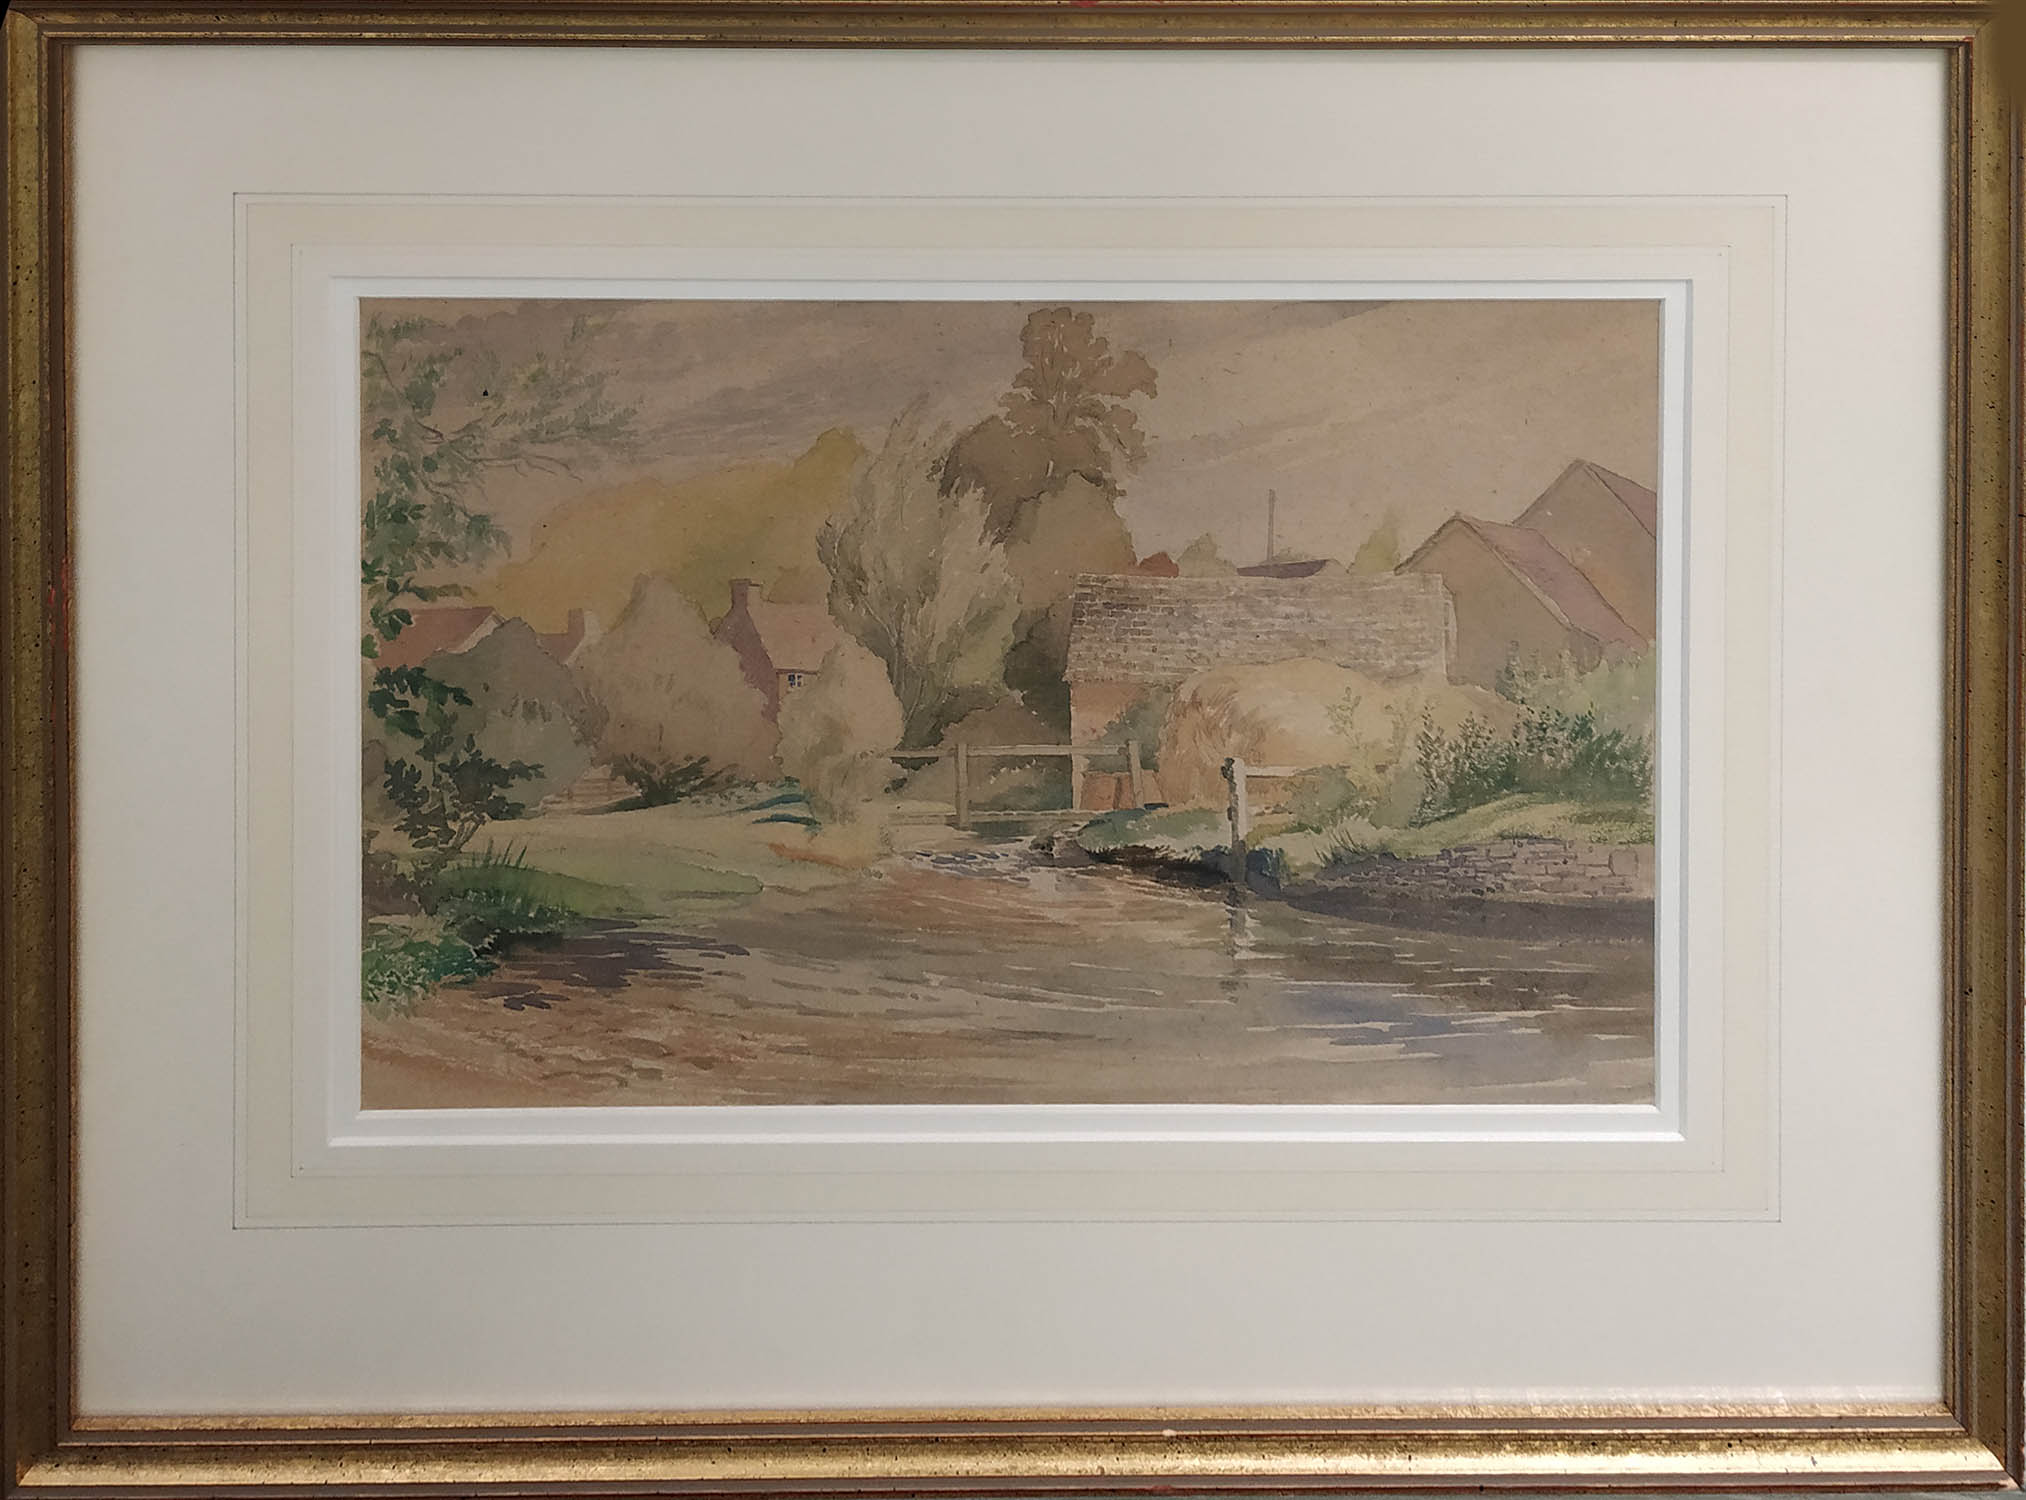 GEORGE E. LEE (c. 1990) 'Village scenes with Cottages', a pair of watercolours, 23cm x 33cm, one